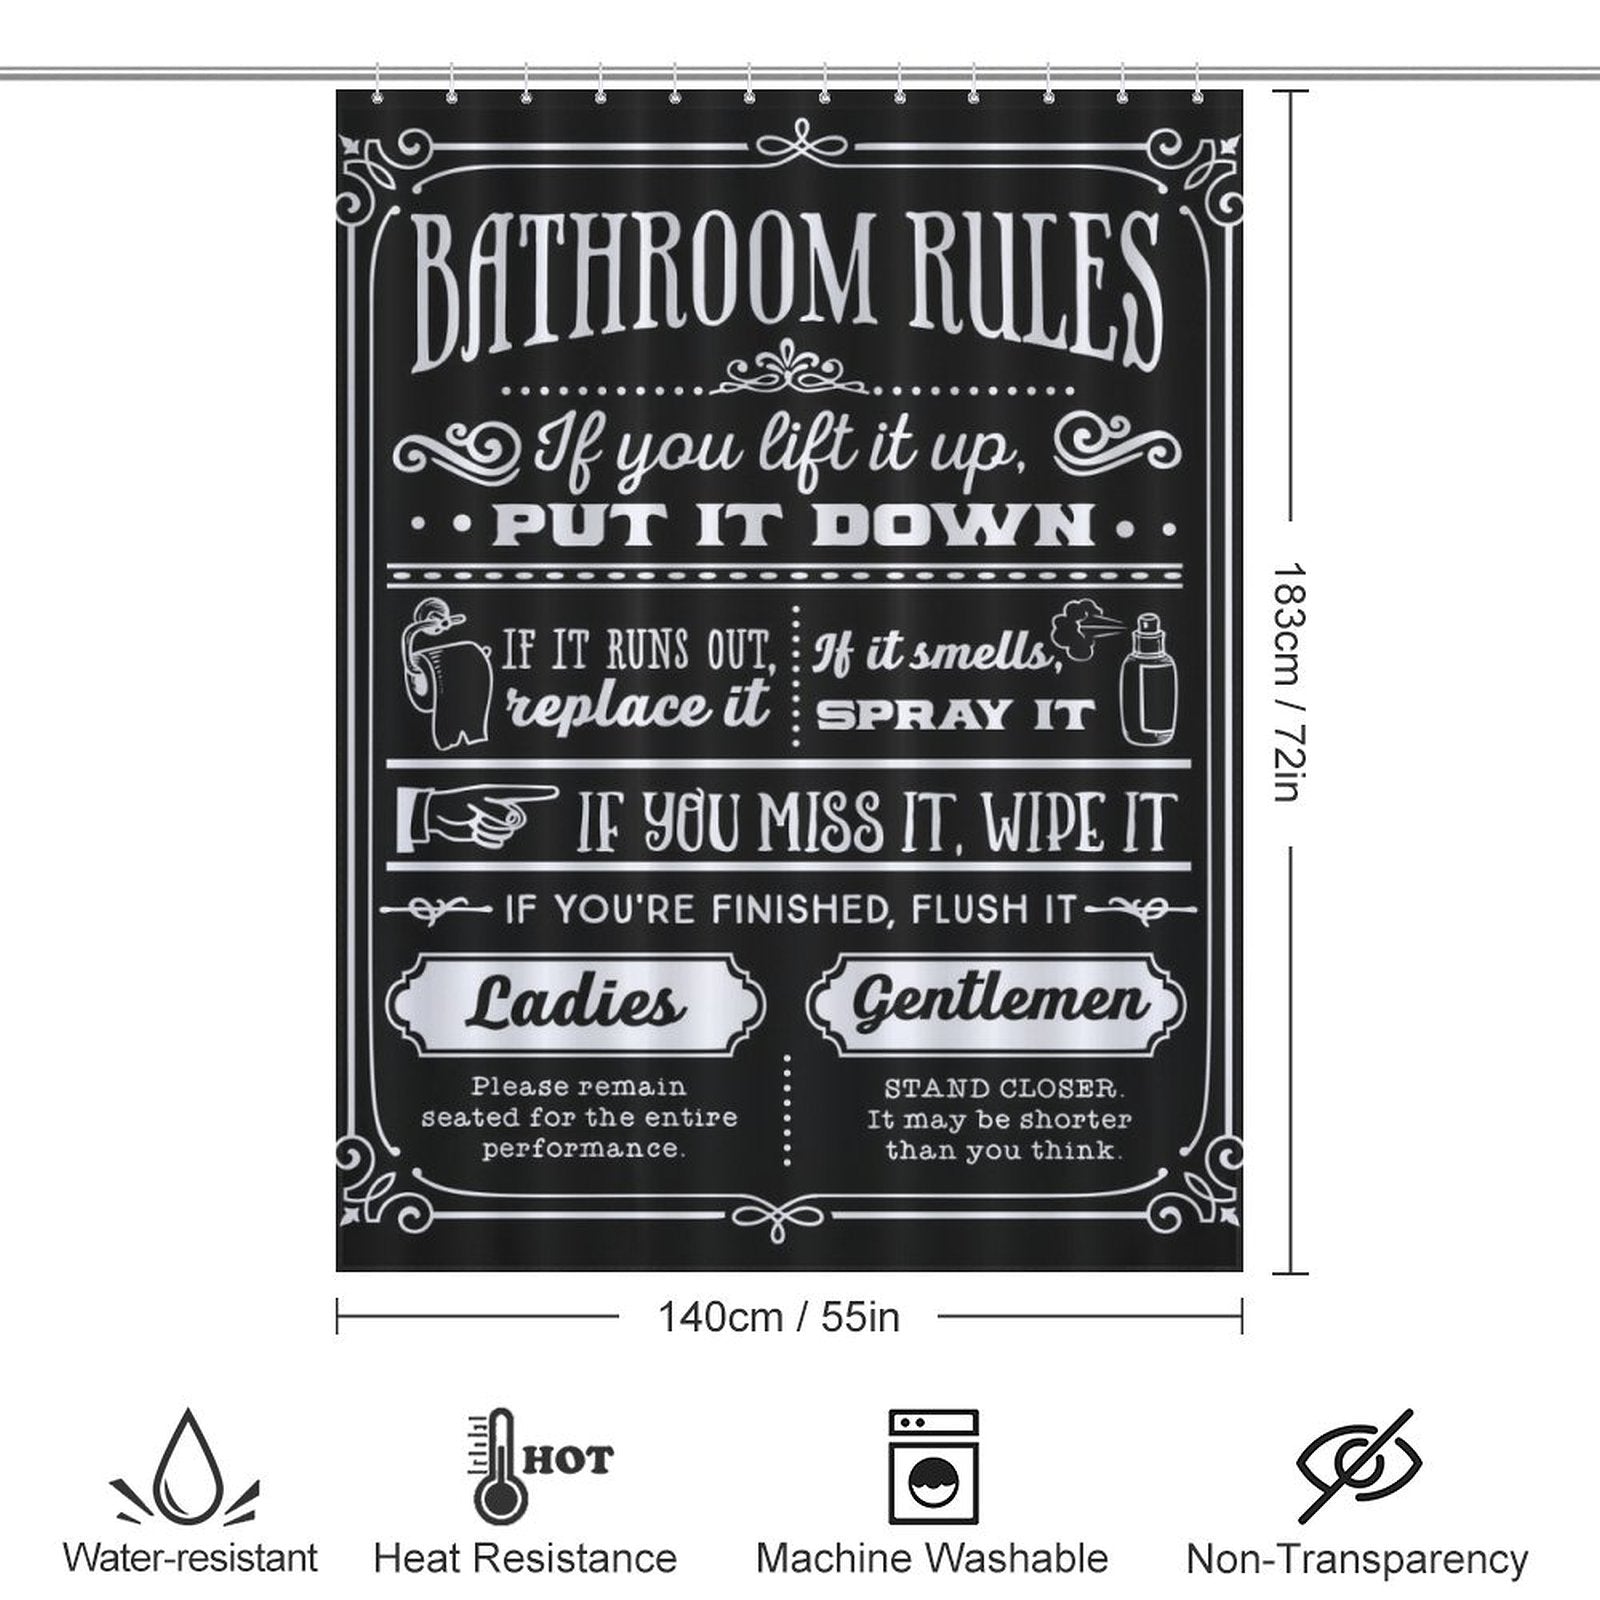 A waterproof black shower curtain featuring a Black and White Fable Motto with white text listing bathroom rules, including putting the seat down, replacing empty items, wiping misses, and flushing. It's the Funny Quotes Shower Curtain Back and White Fable Motto -Cottoncat by Cotton Cat with different instructions for ladies and gentlemen.